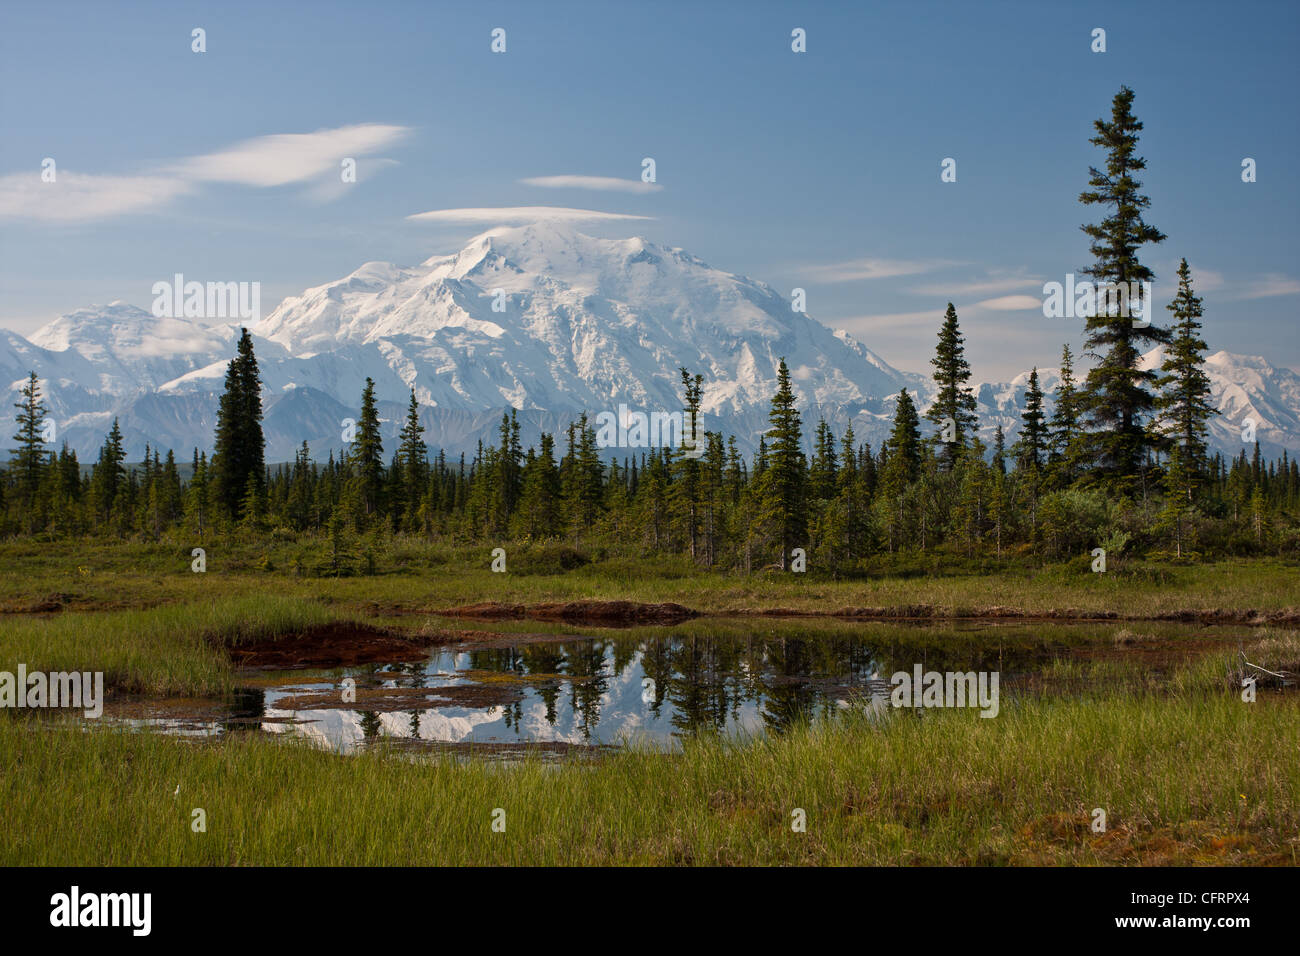 A small tundra pond in the boreal forest reflects Denali (Mt. McKinley) in Denali National Park, AK, USA. Stock Photo